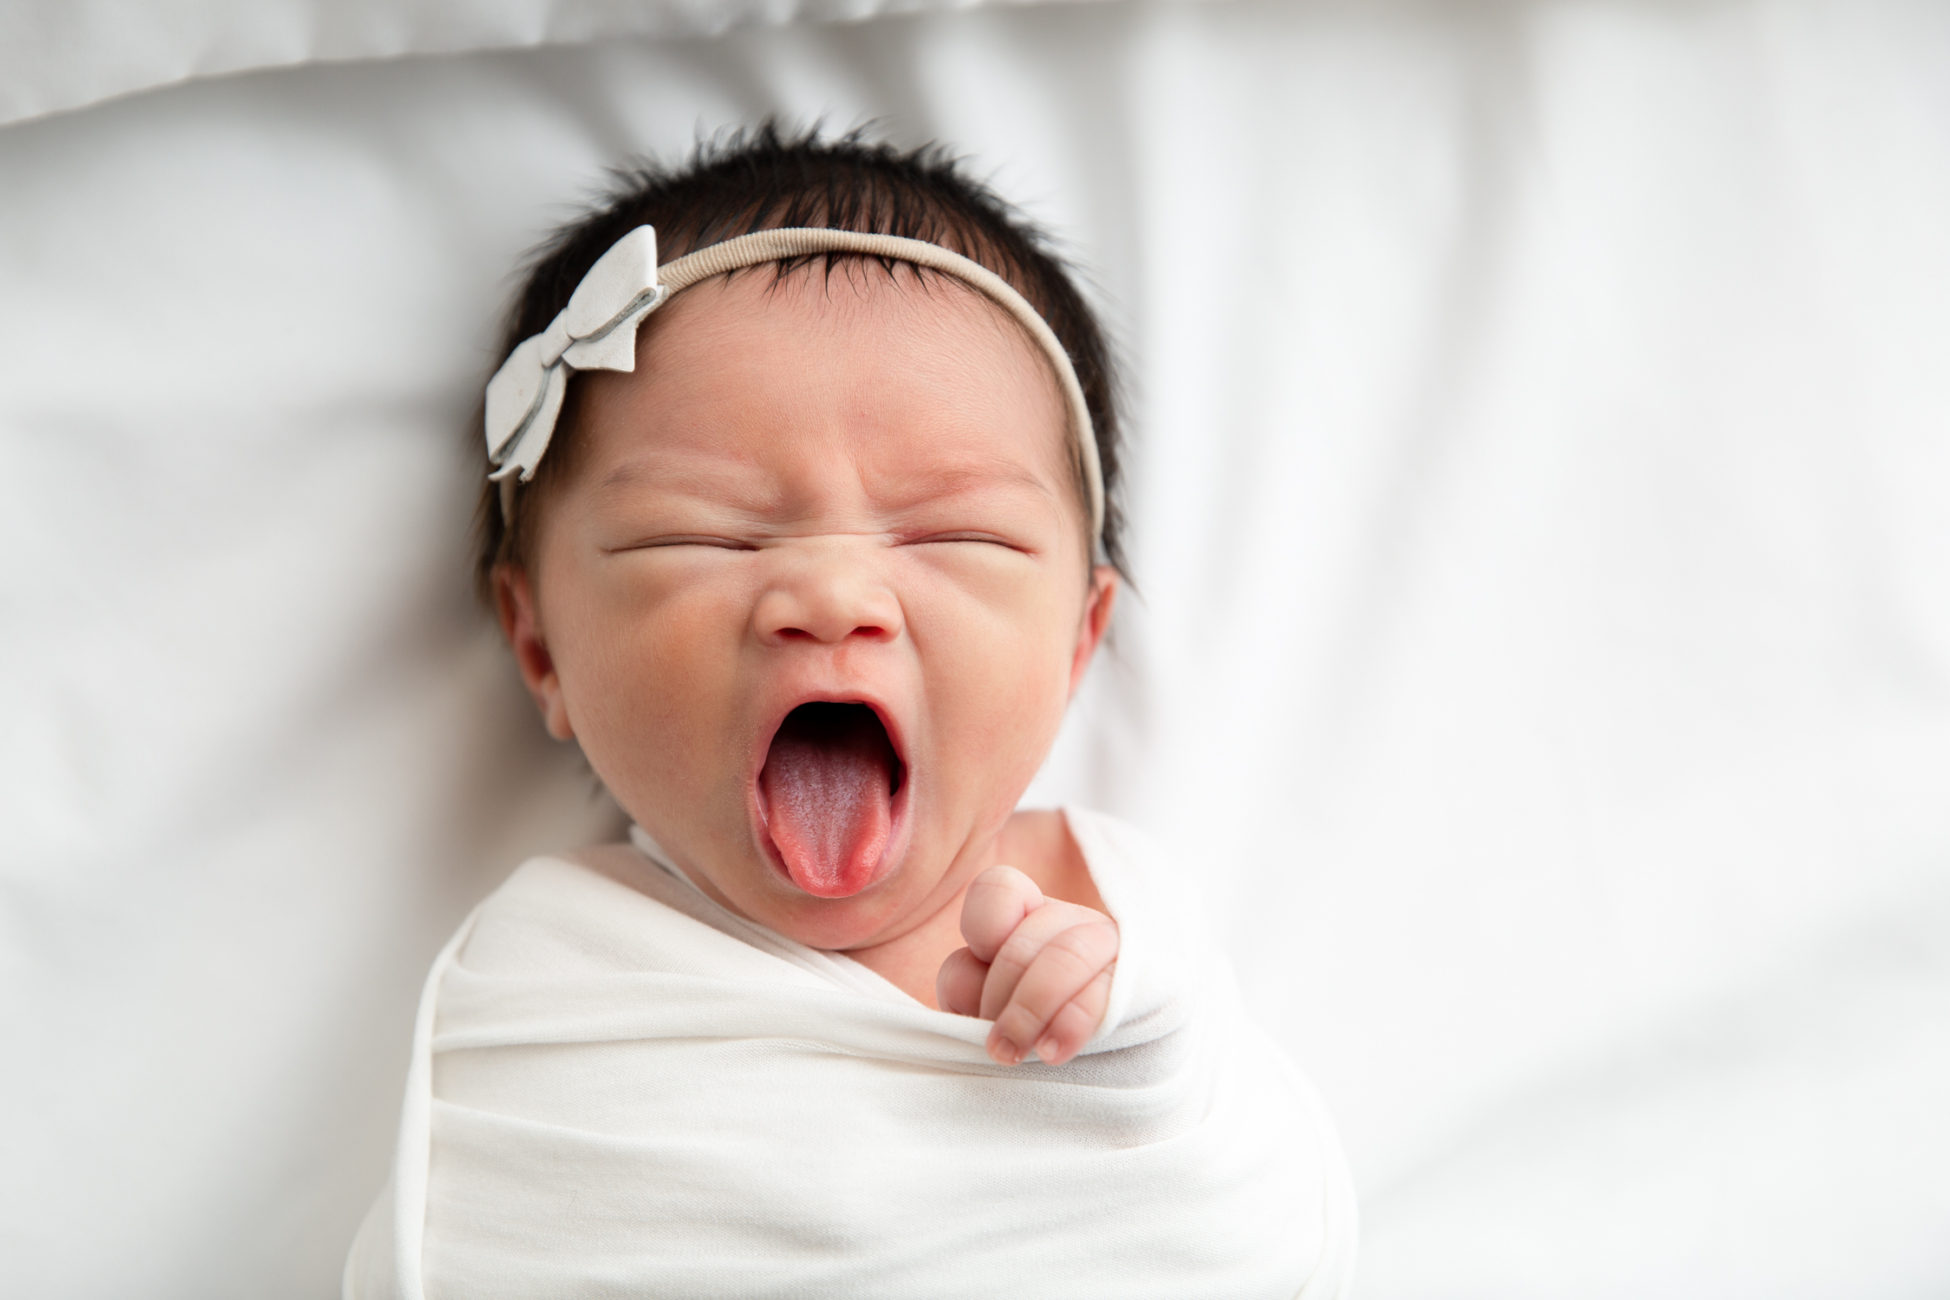 newborn baby yawning with tounge out